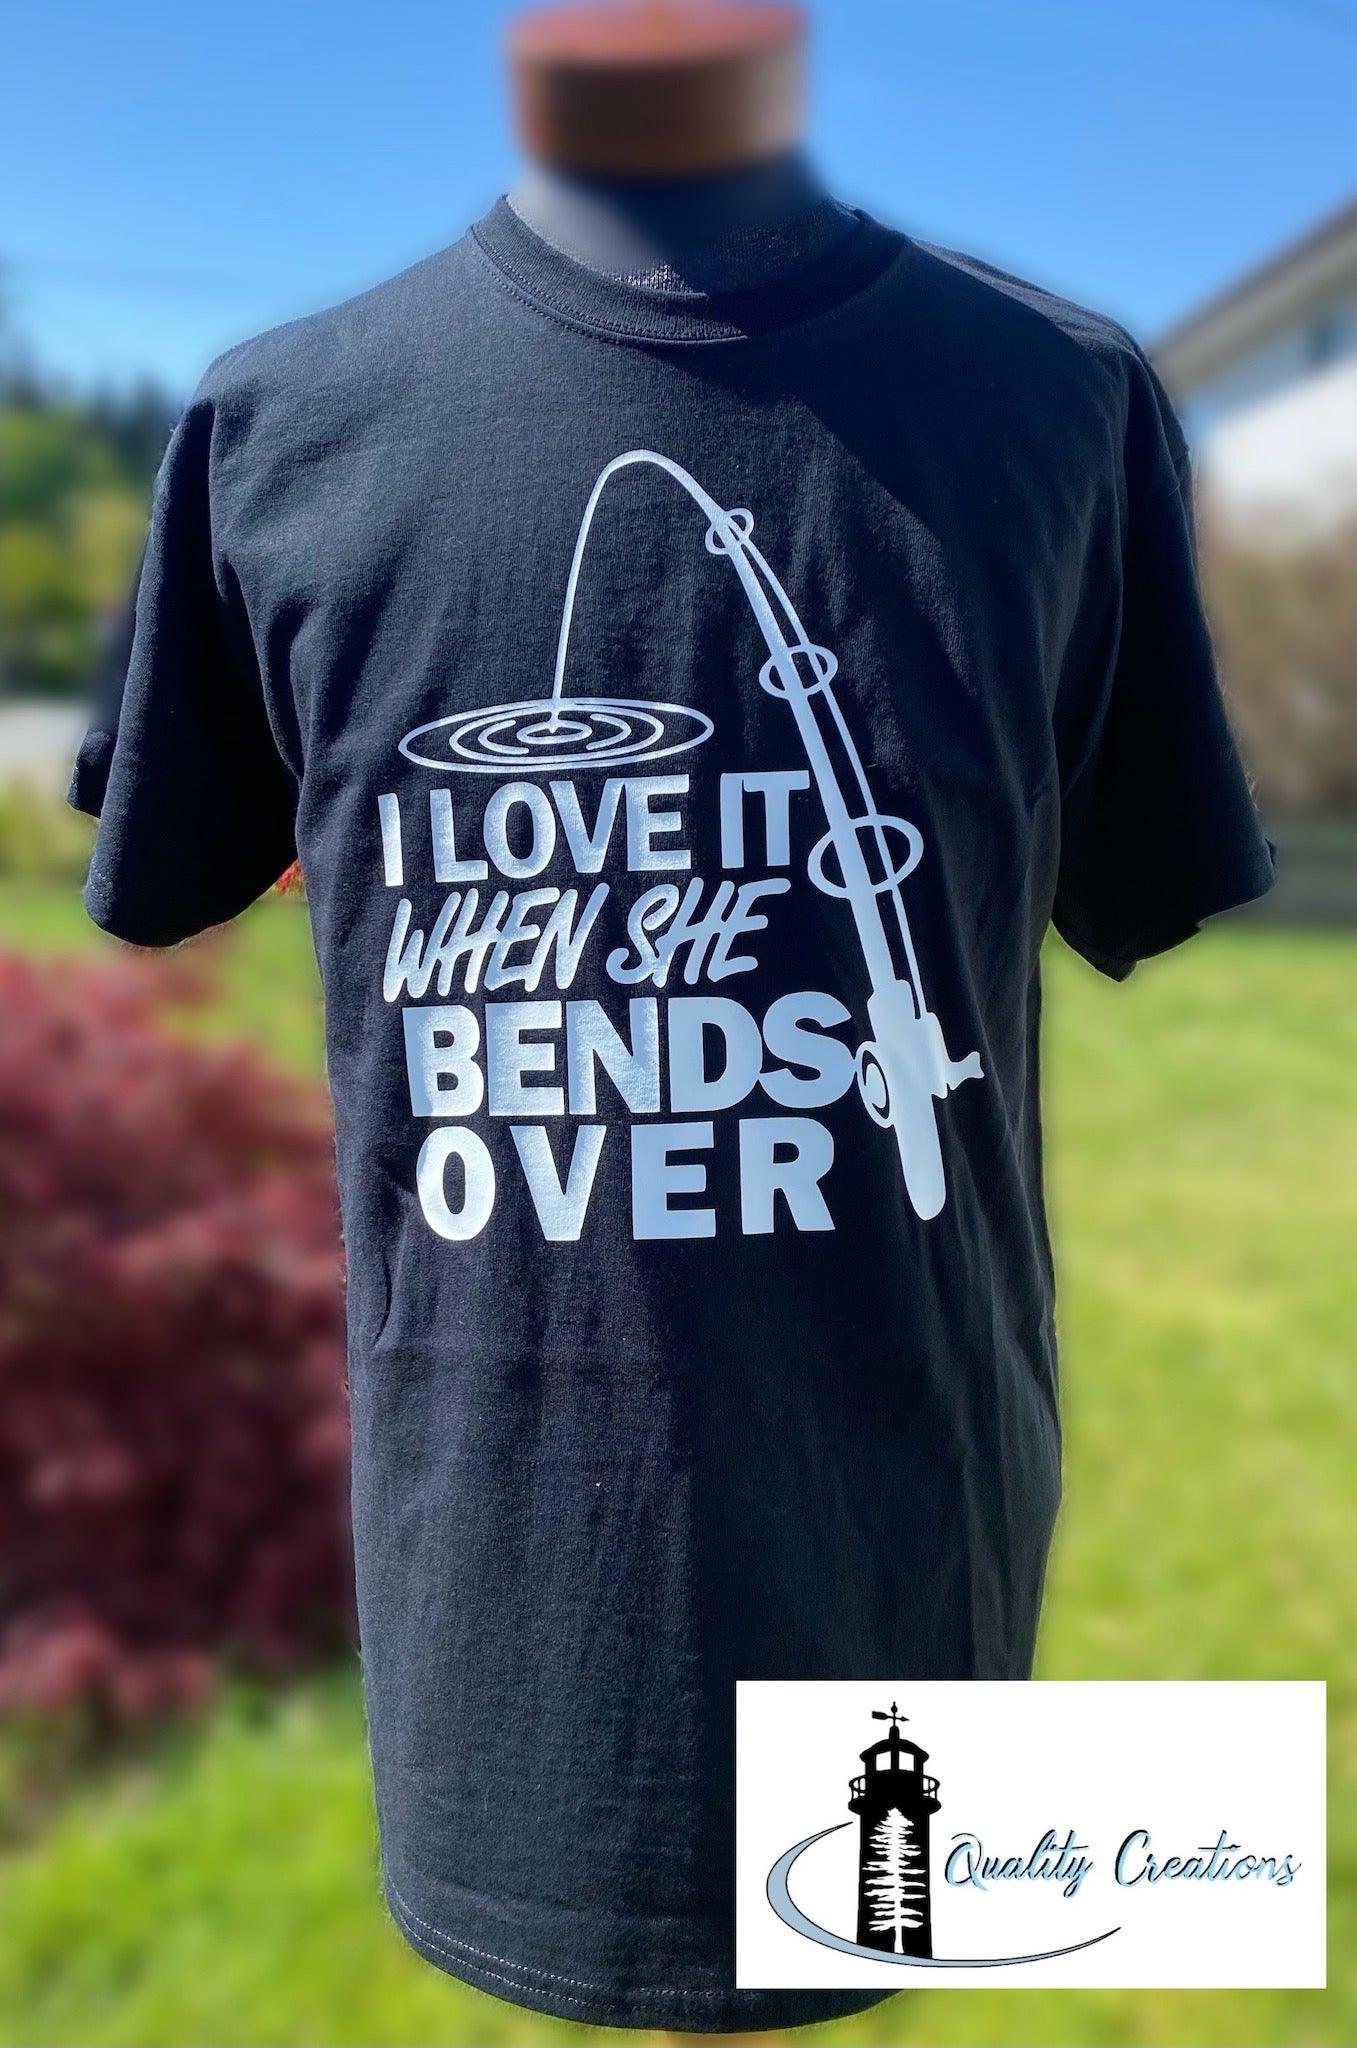 I Love It When She Bends Over Fishing 100% Cotton Shirt M / Black by Quality Creations - Coastal Sisters